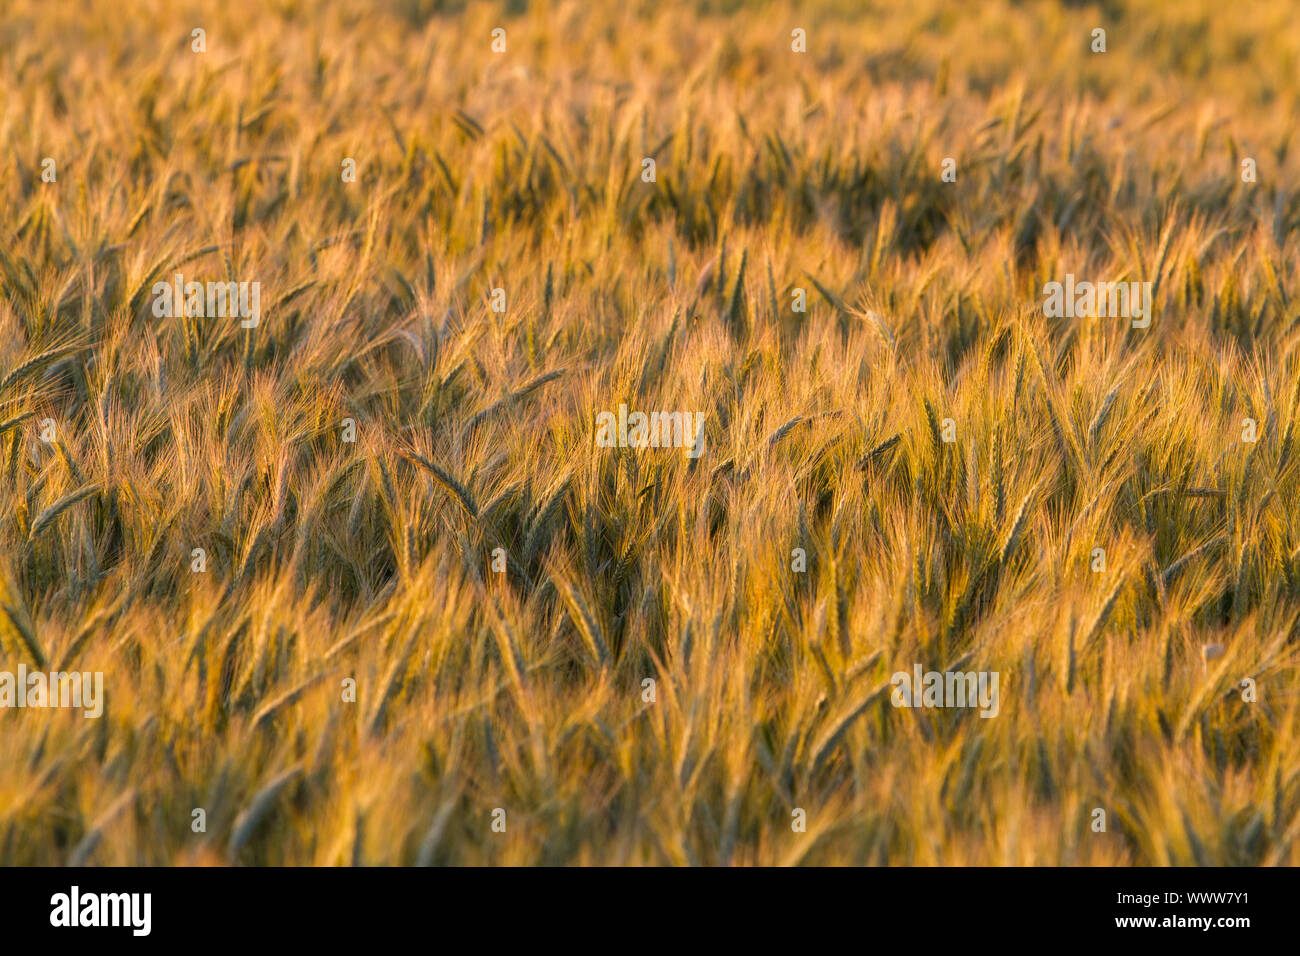 mature cereal field Stock Photo